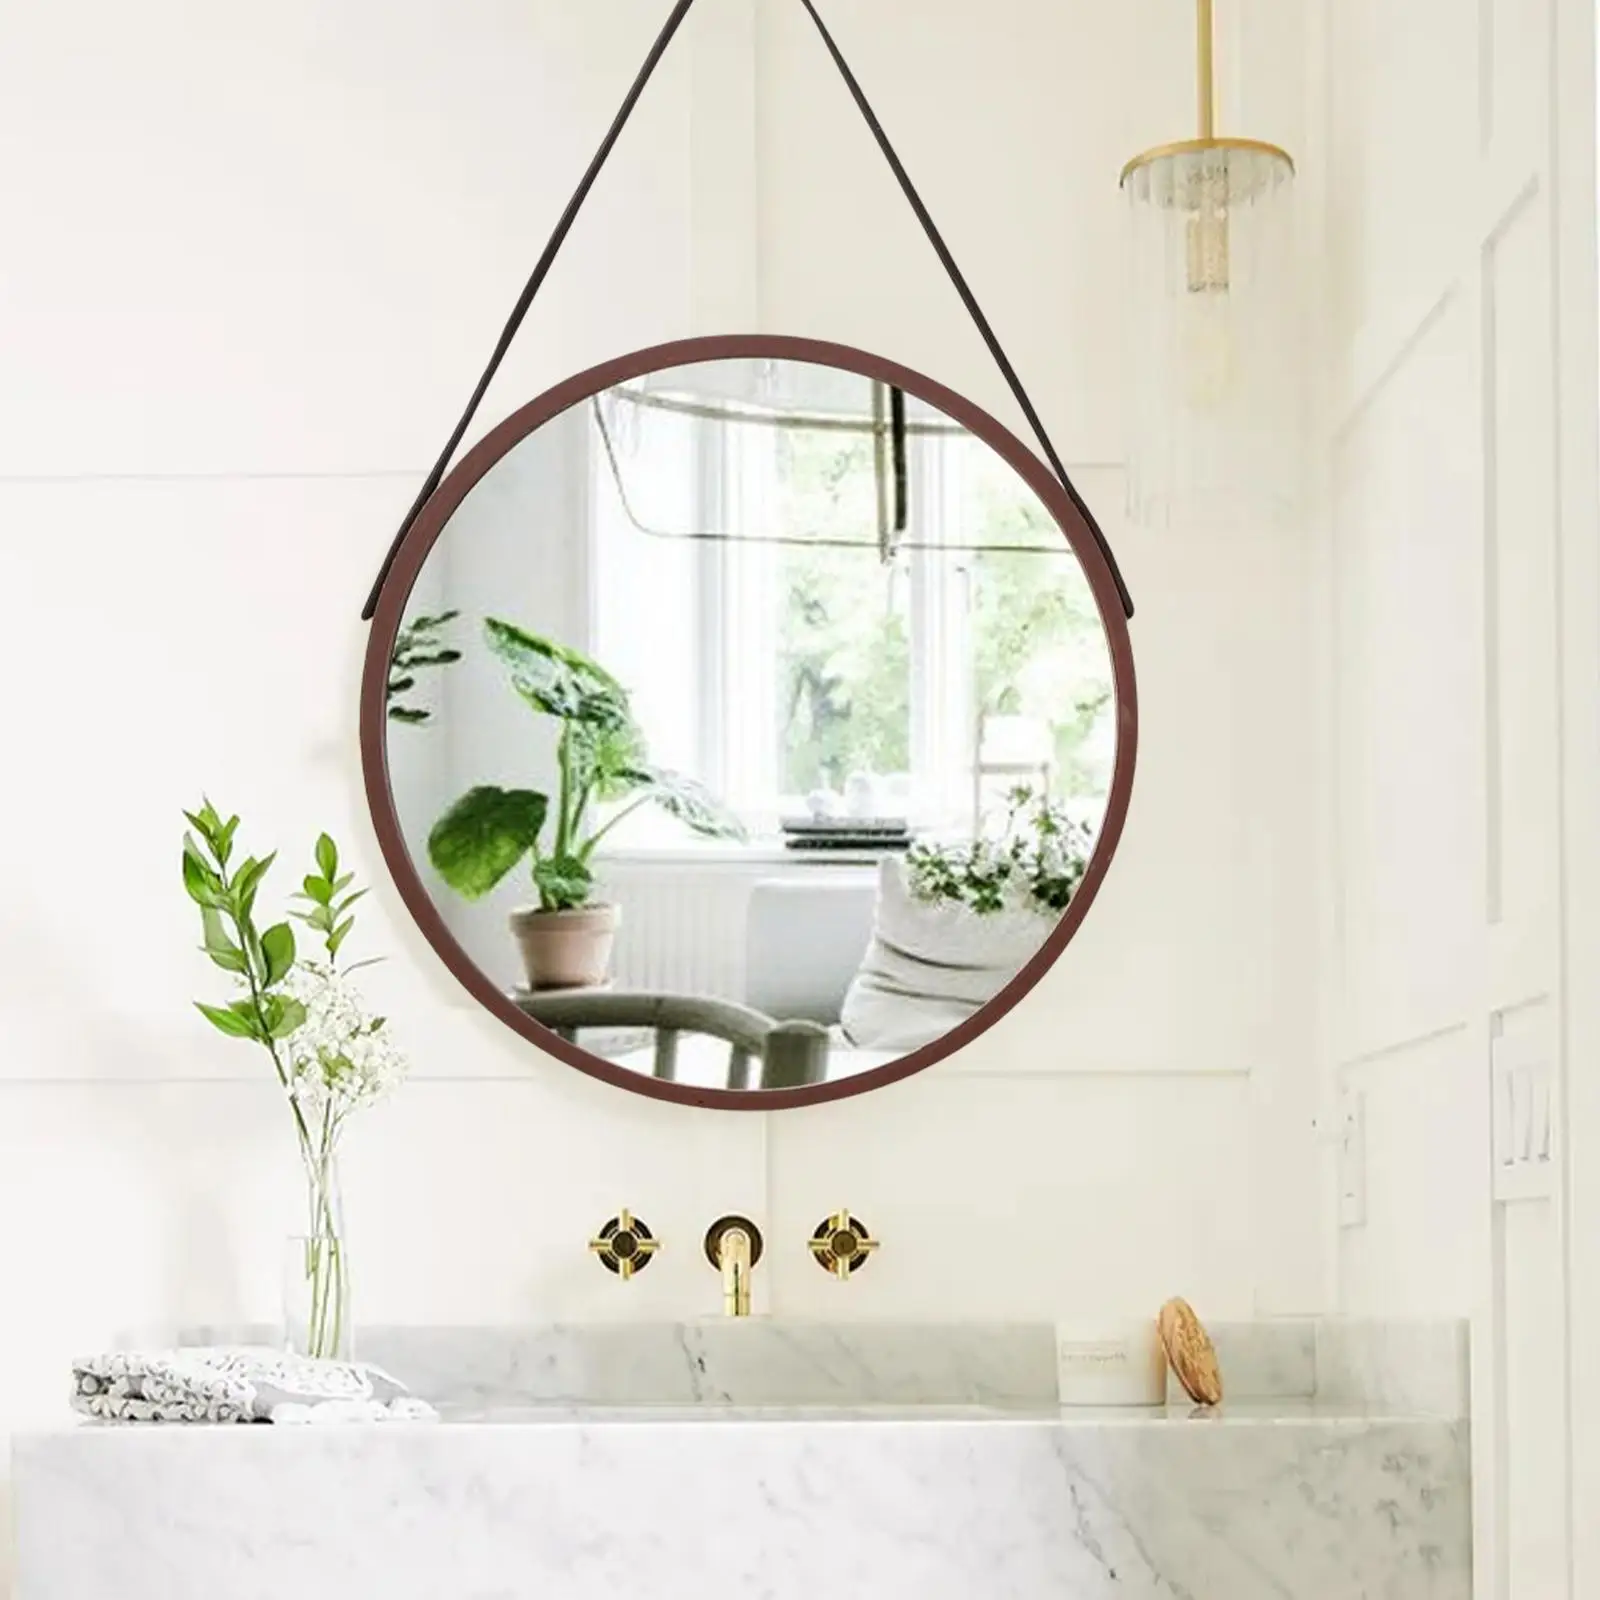 Wall Hanging Mirror Round Ornament  Mount for Salon Home Decor